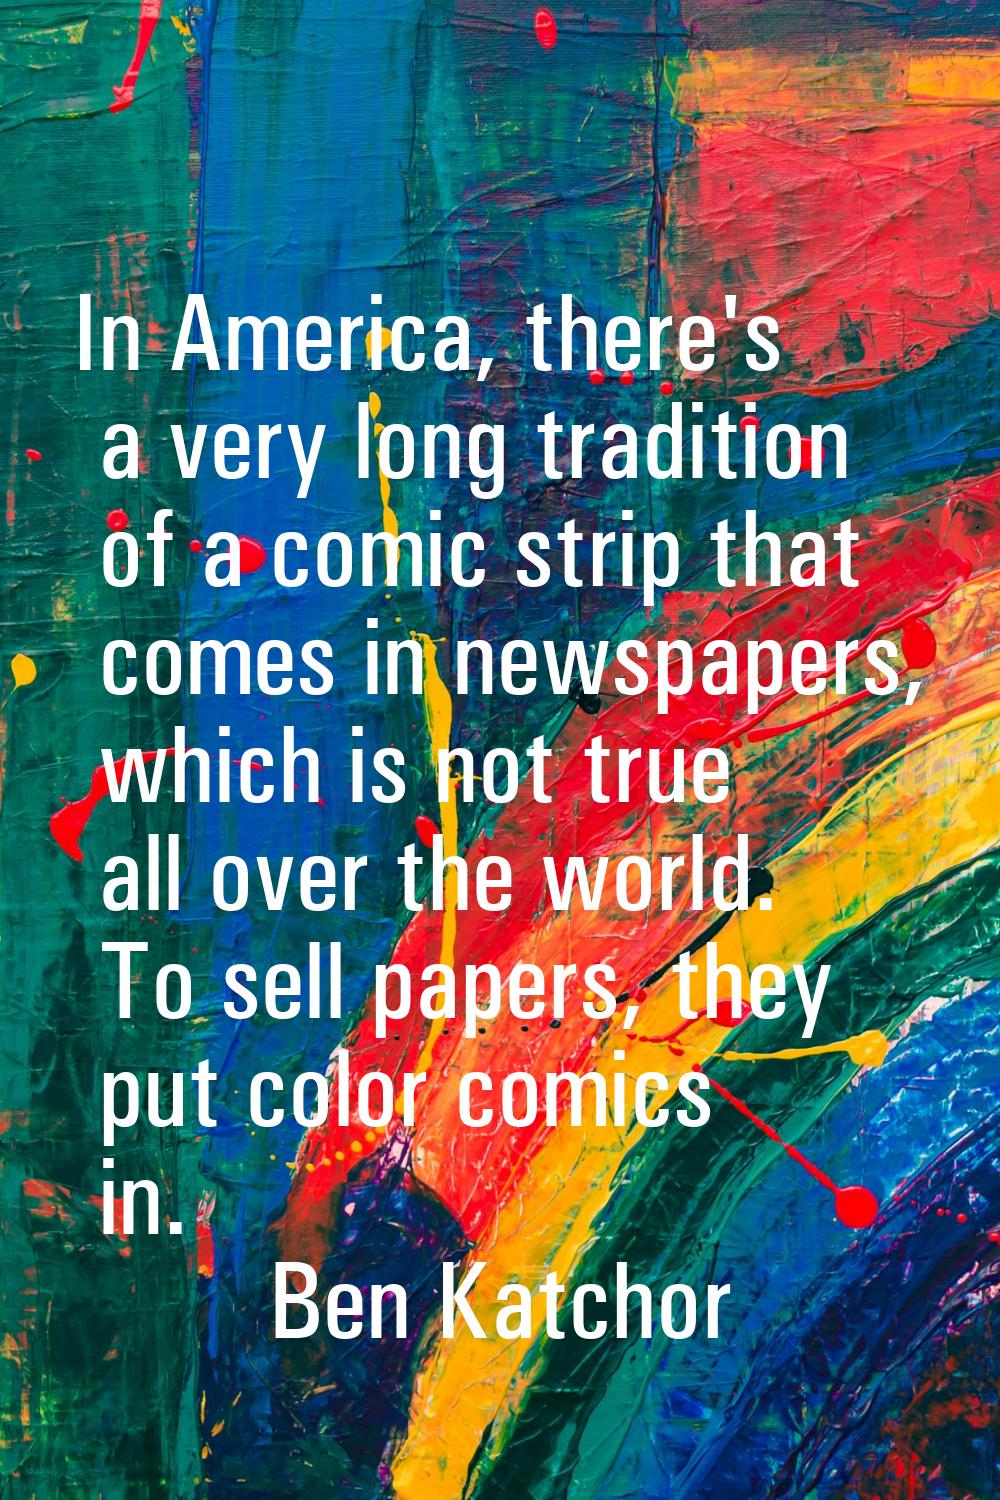 In America, there's a very long tradition of a comic strip that comes in newspapers, which is not t